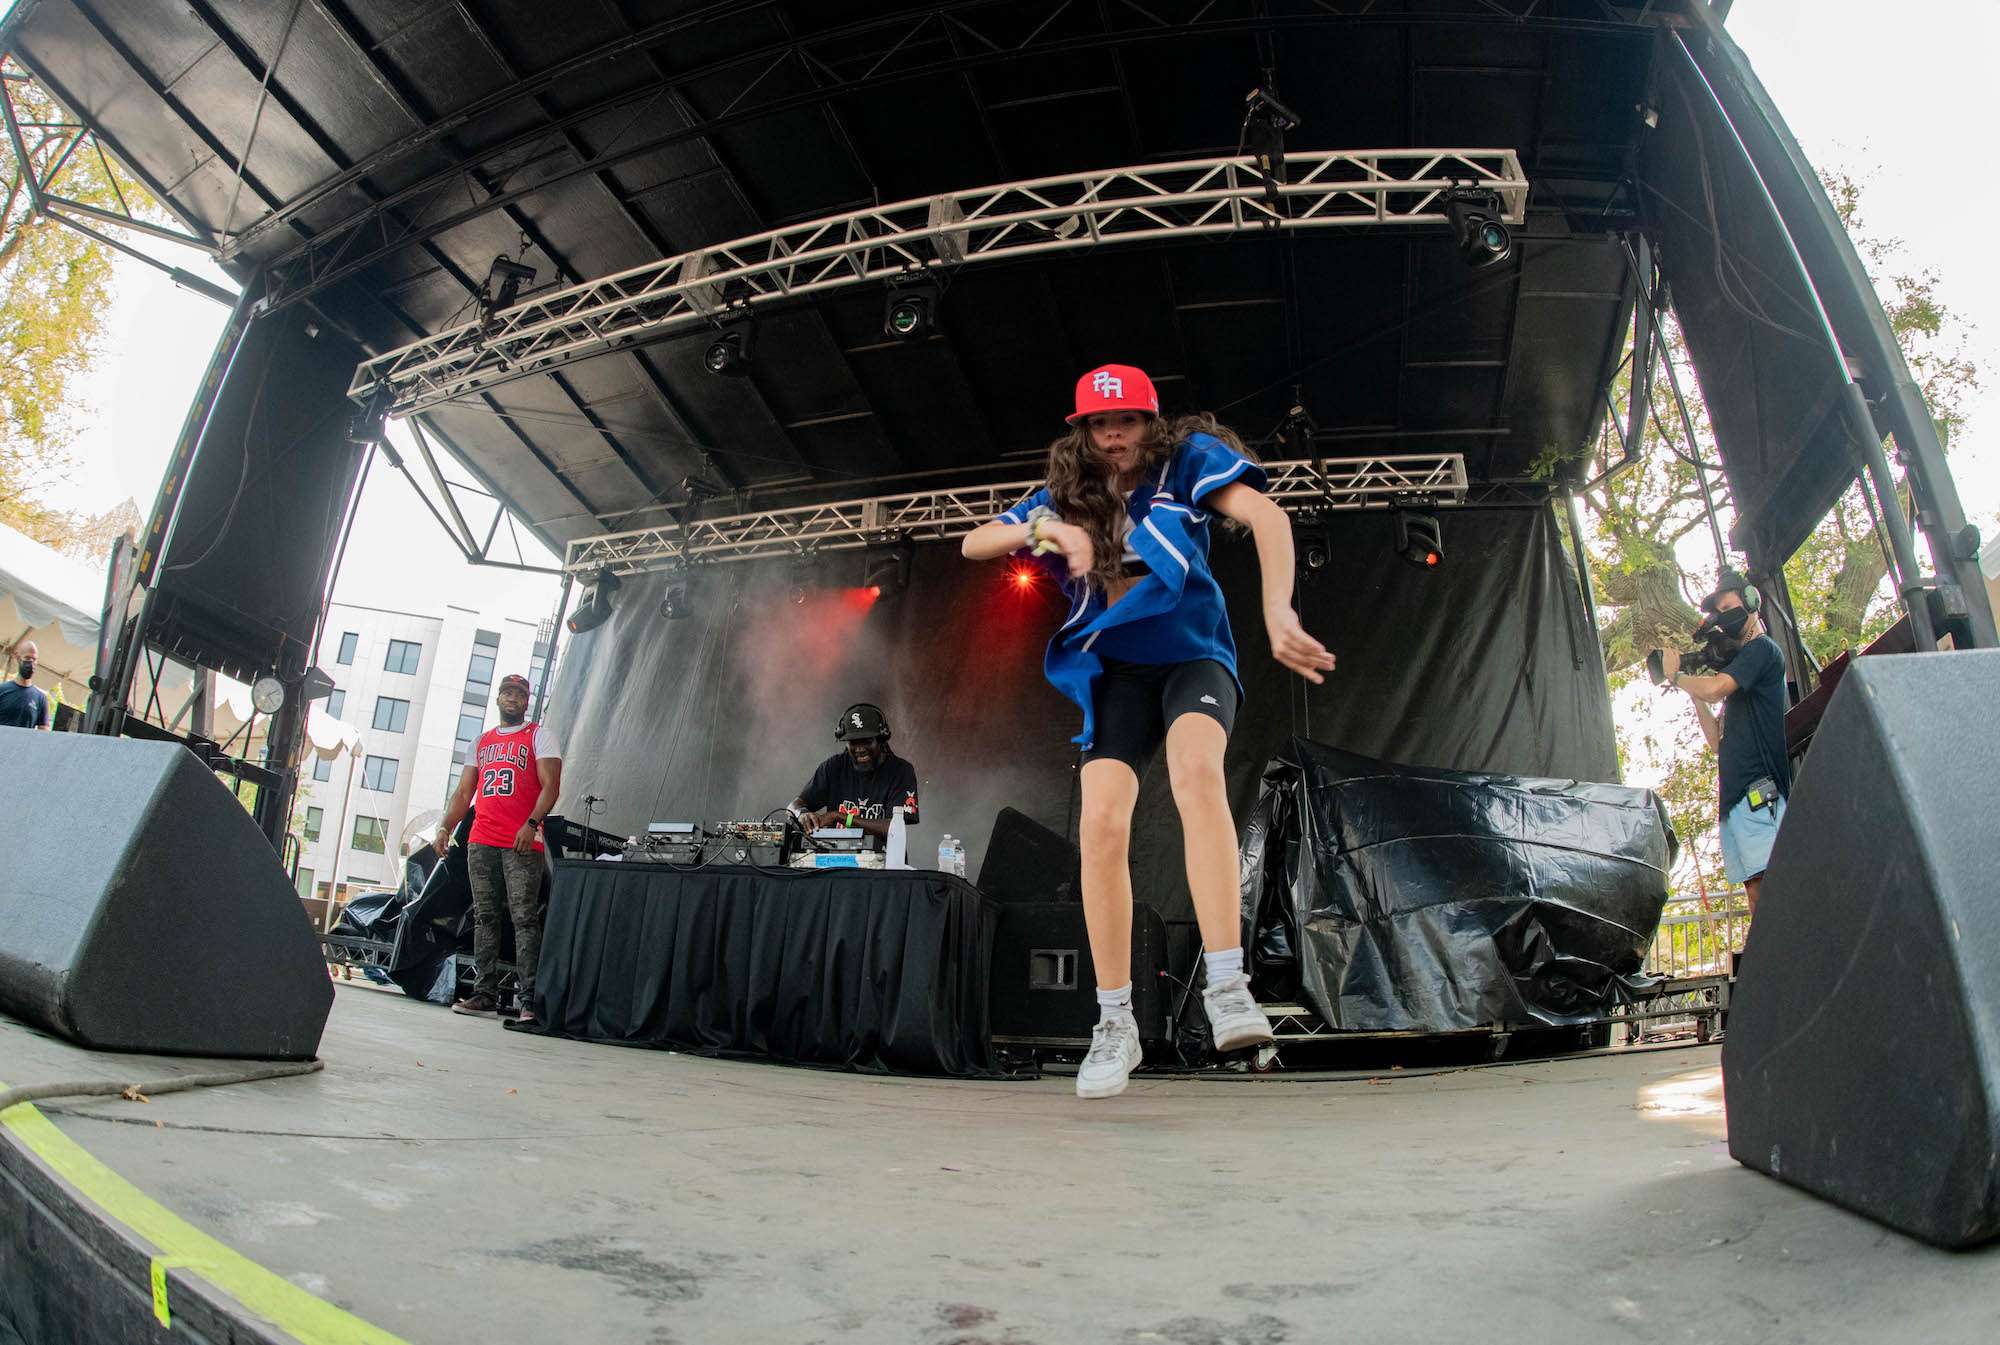 RP Boo Live at Pitchfork [GALLERY] 7